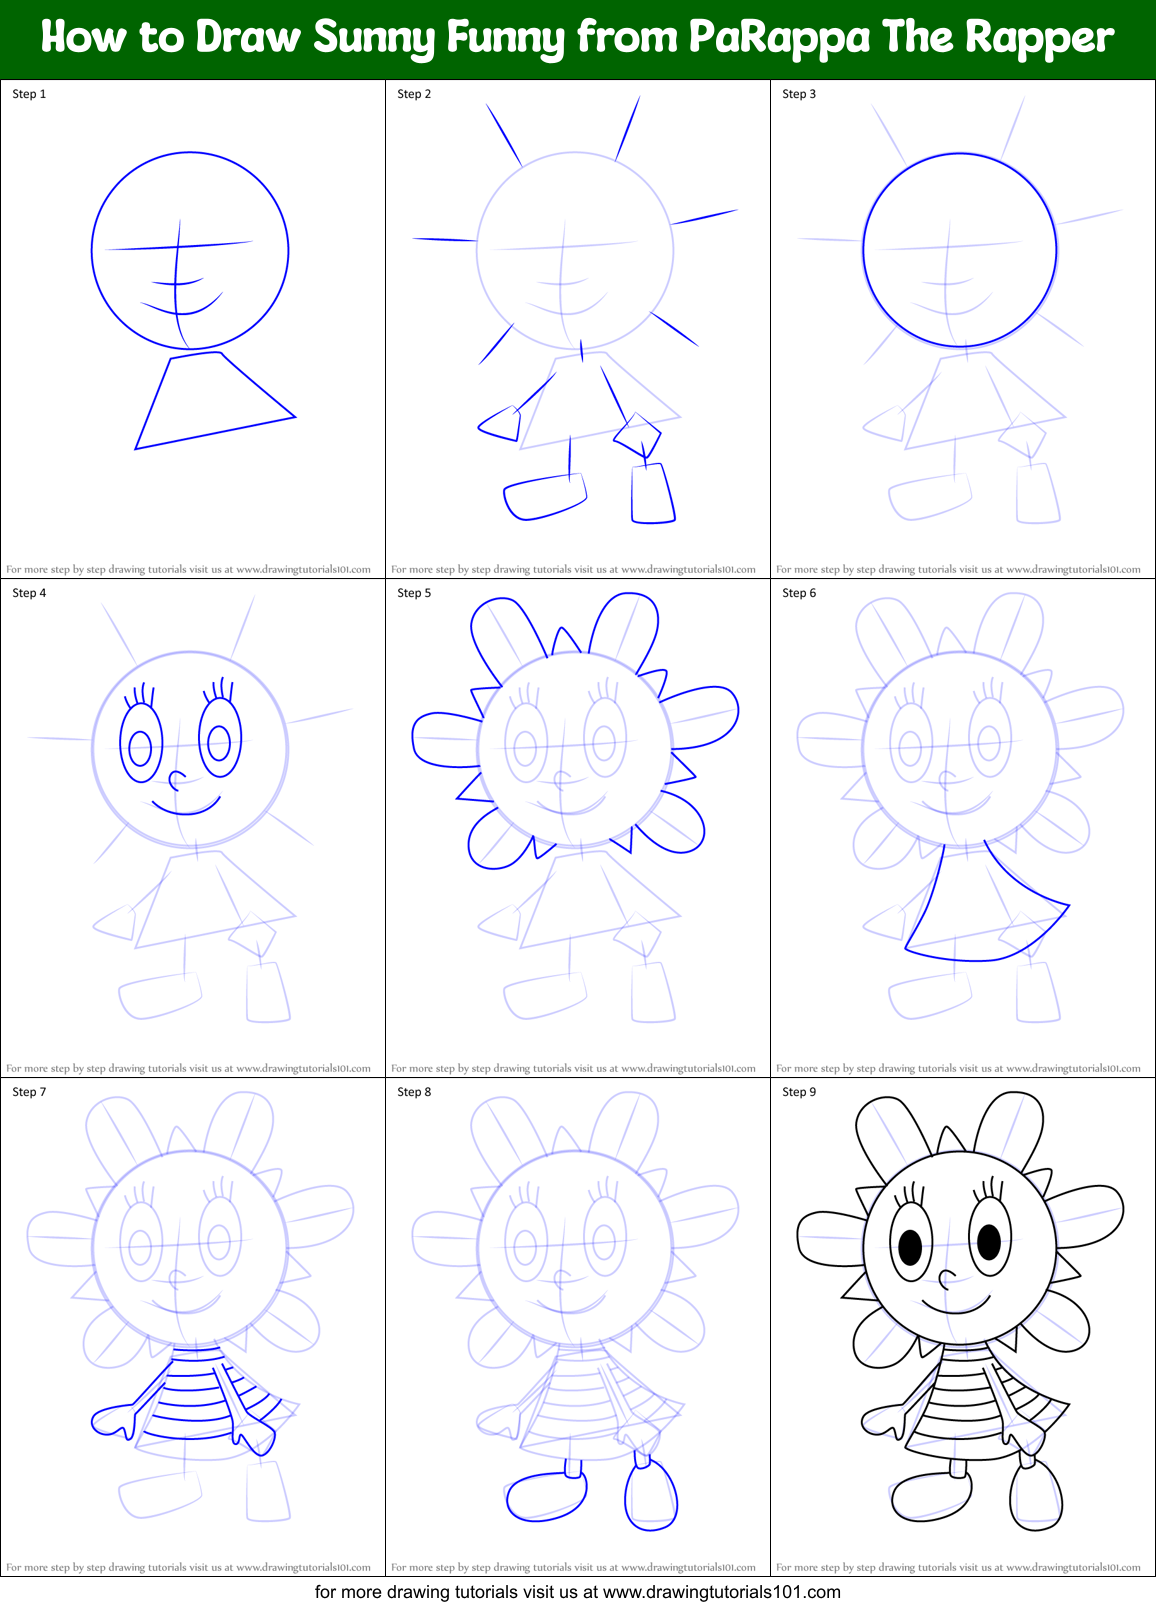 How to Draw Sunny Funny from PaRappa The Rapper printable step by step  drawing sheet : 